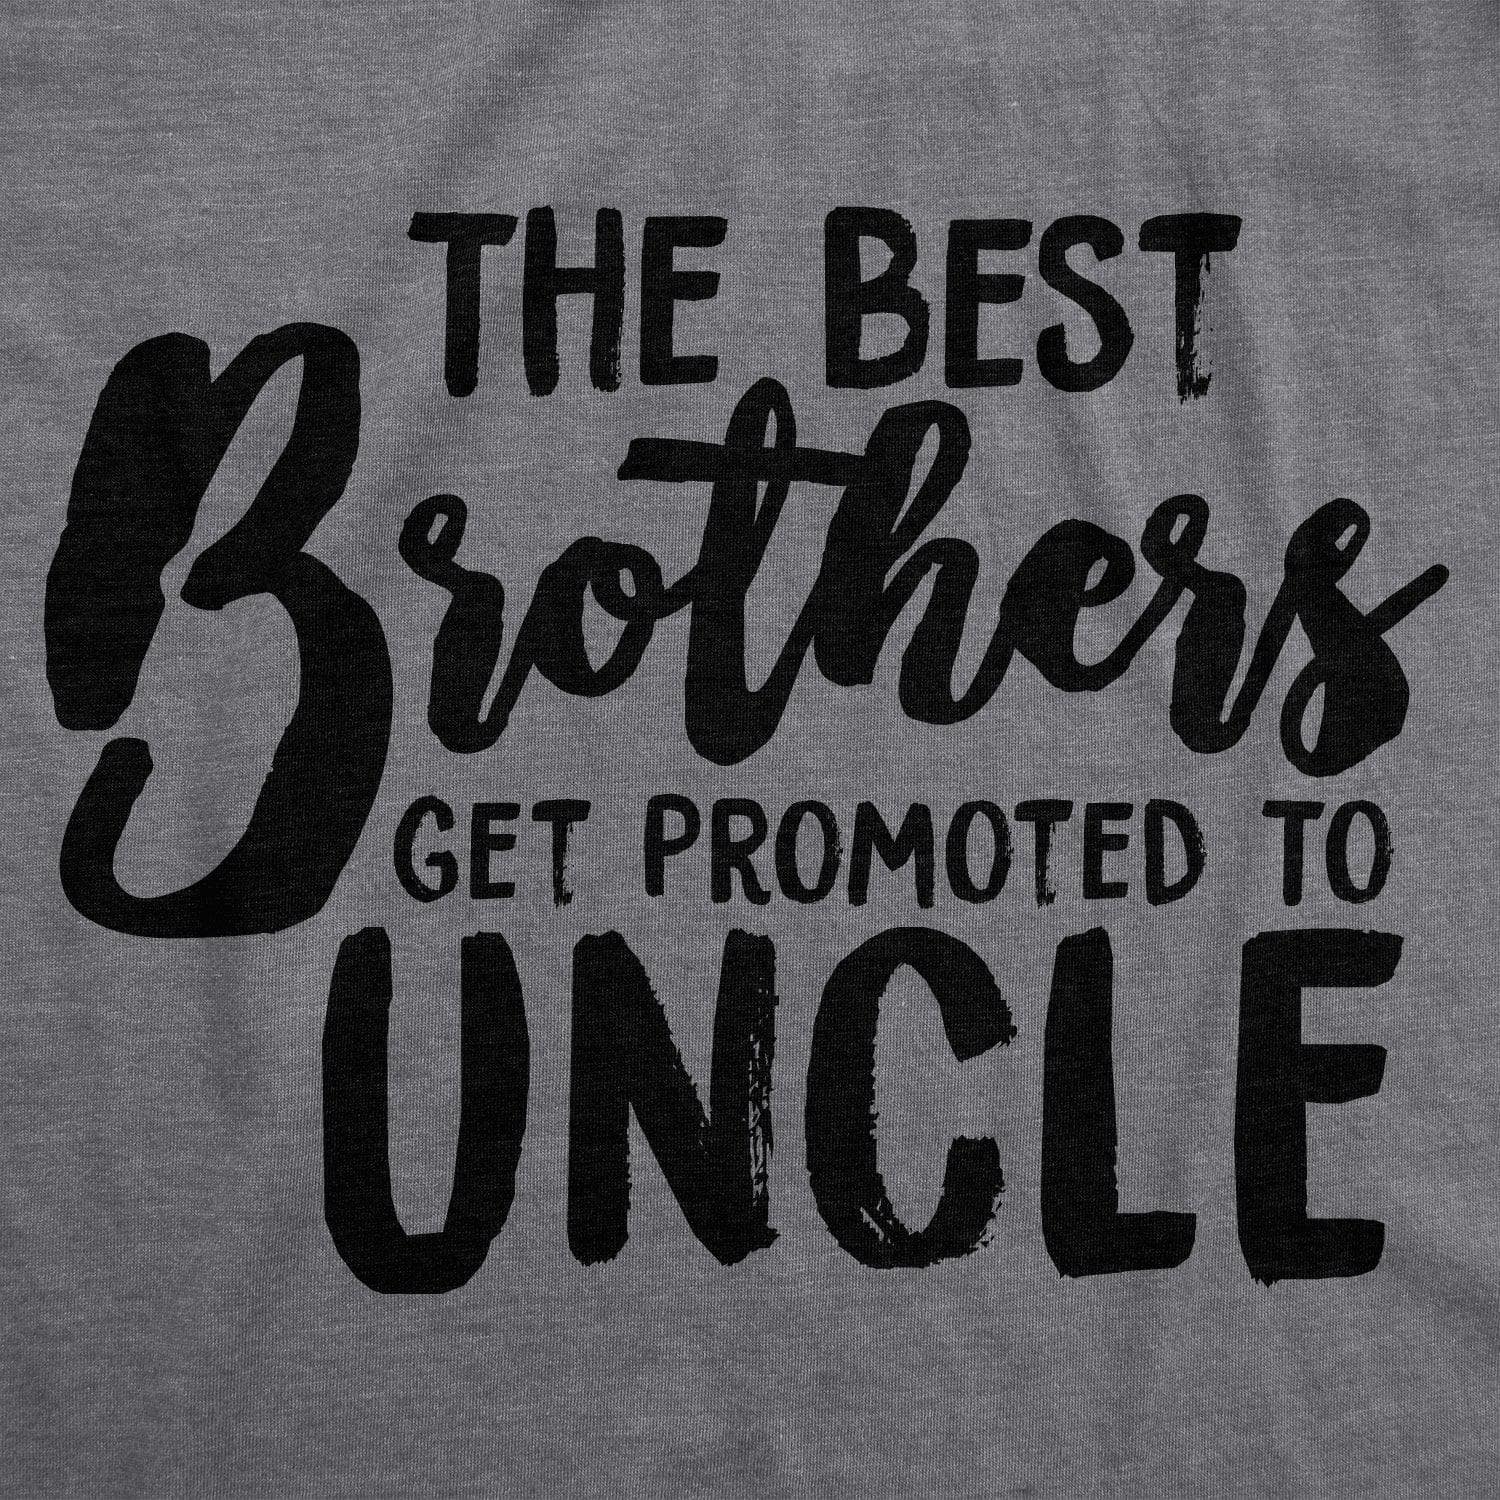 Best Brothers Get Promoted To Uncle Men's Tshirt  -  Crazy Dog T-Shirts